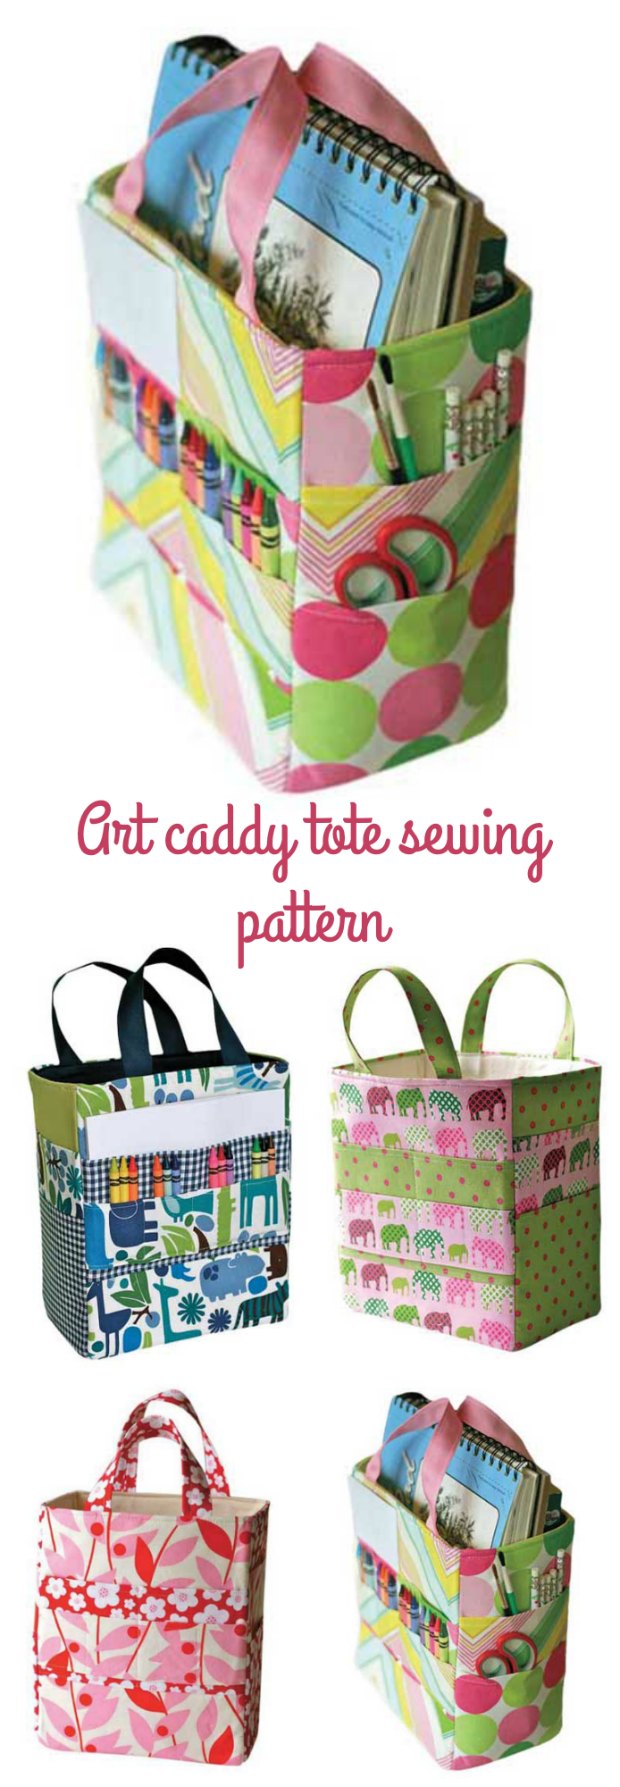 Sewing pattern for this art tote bag for all your drawing, painting and crafting supplies. Great to keep kids organised or take supplies on the move.